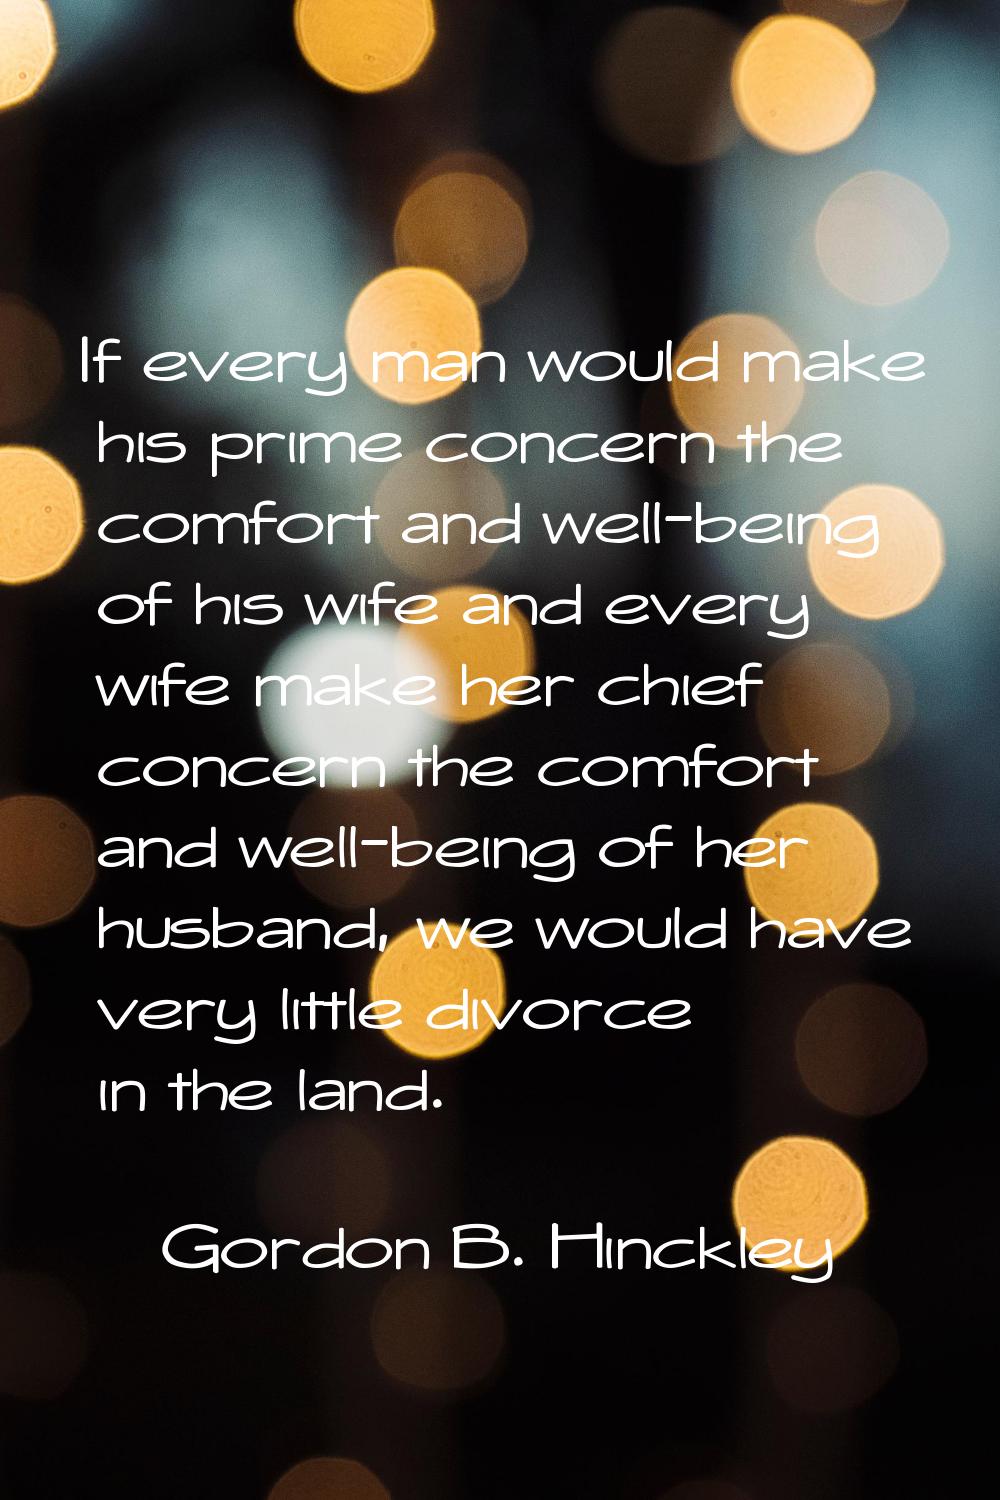 If every man would make his prime concern the comfort and well-being of his wife and every wife mak